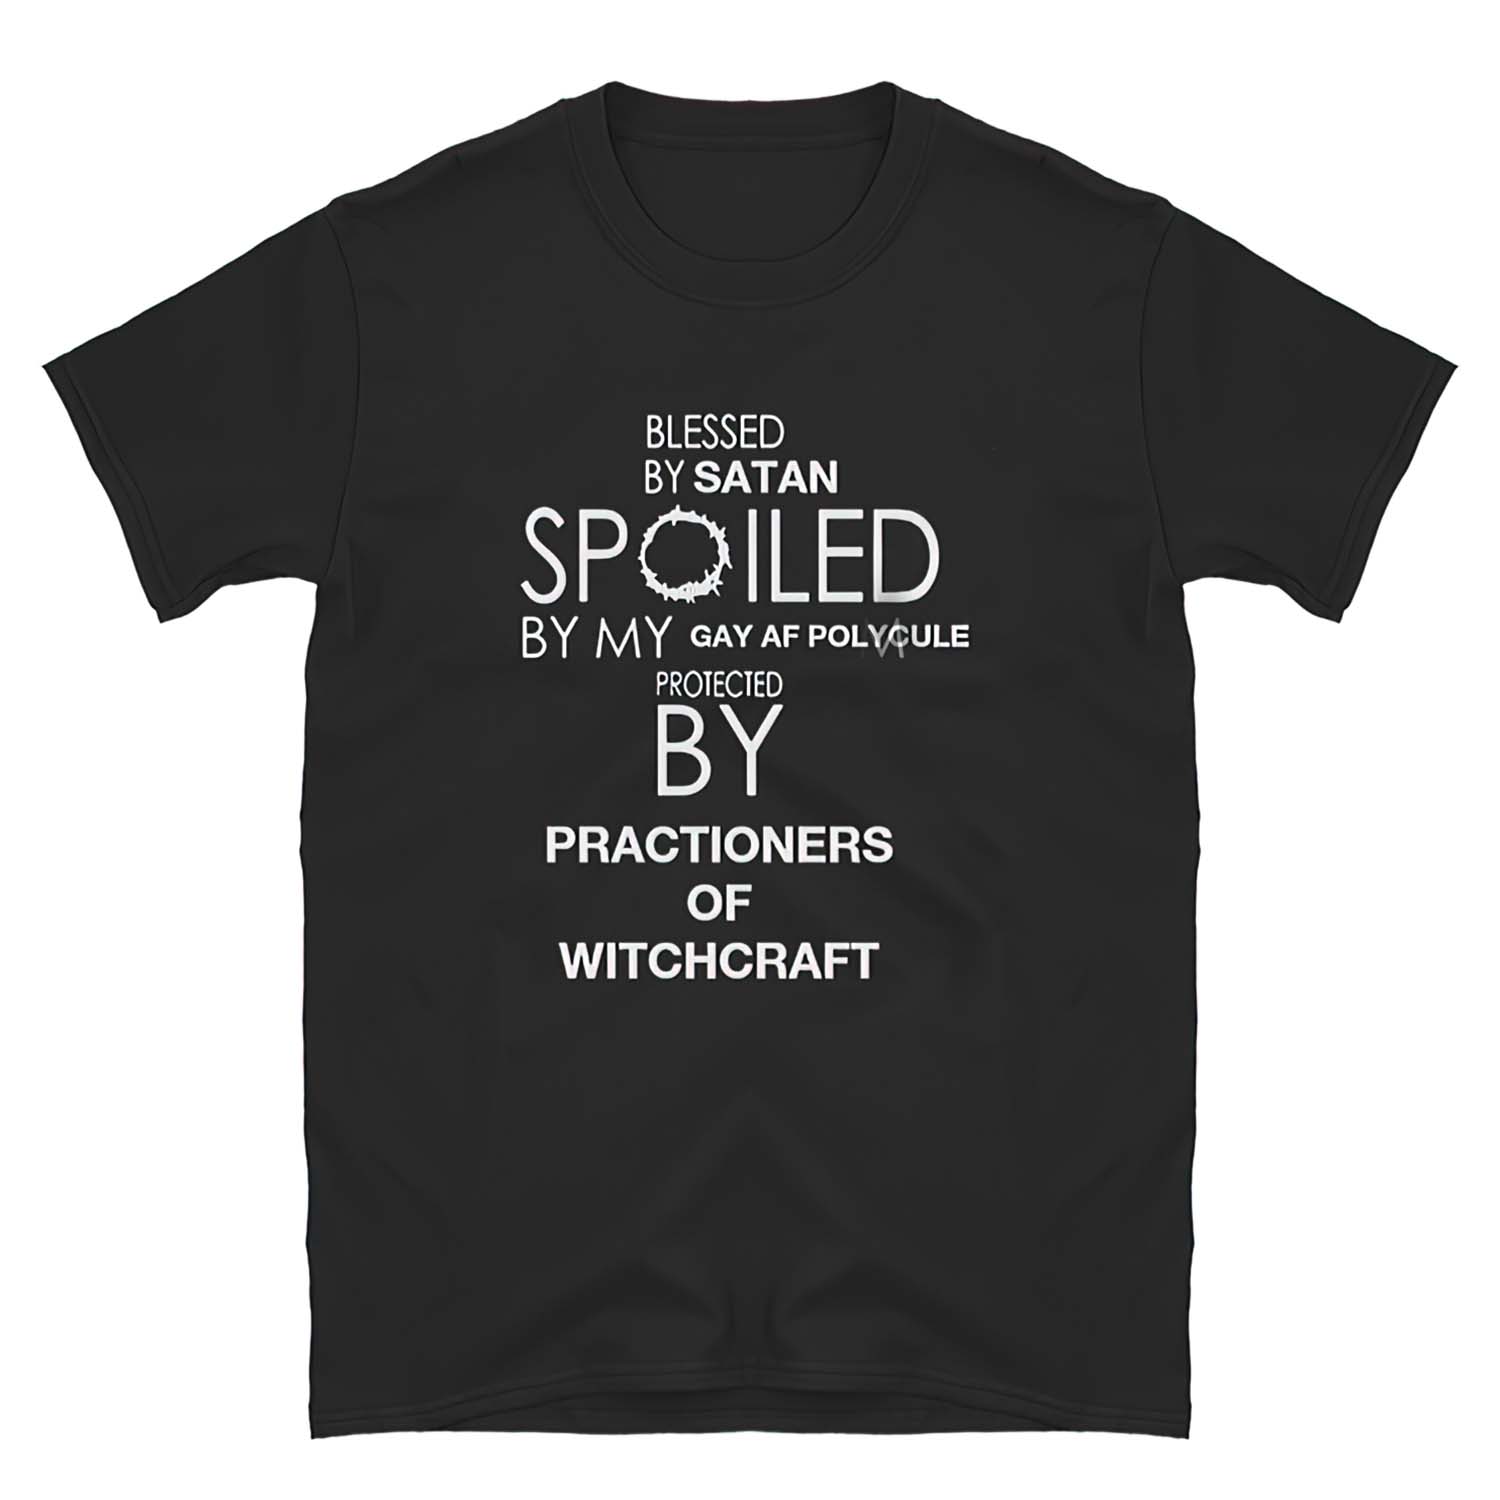 Blessed By Satan Spoiled By My Gay Af Polycule Protected By Practioners Of Witchcraft Shirt